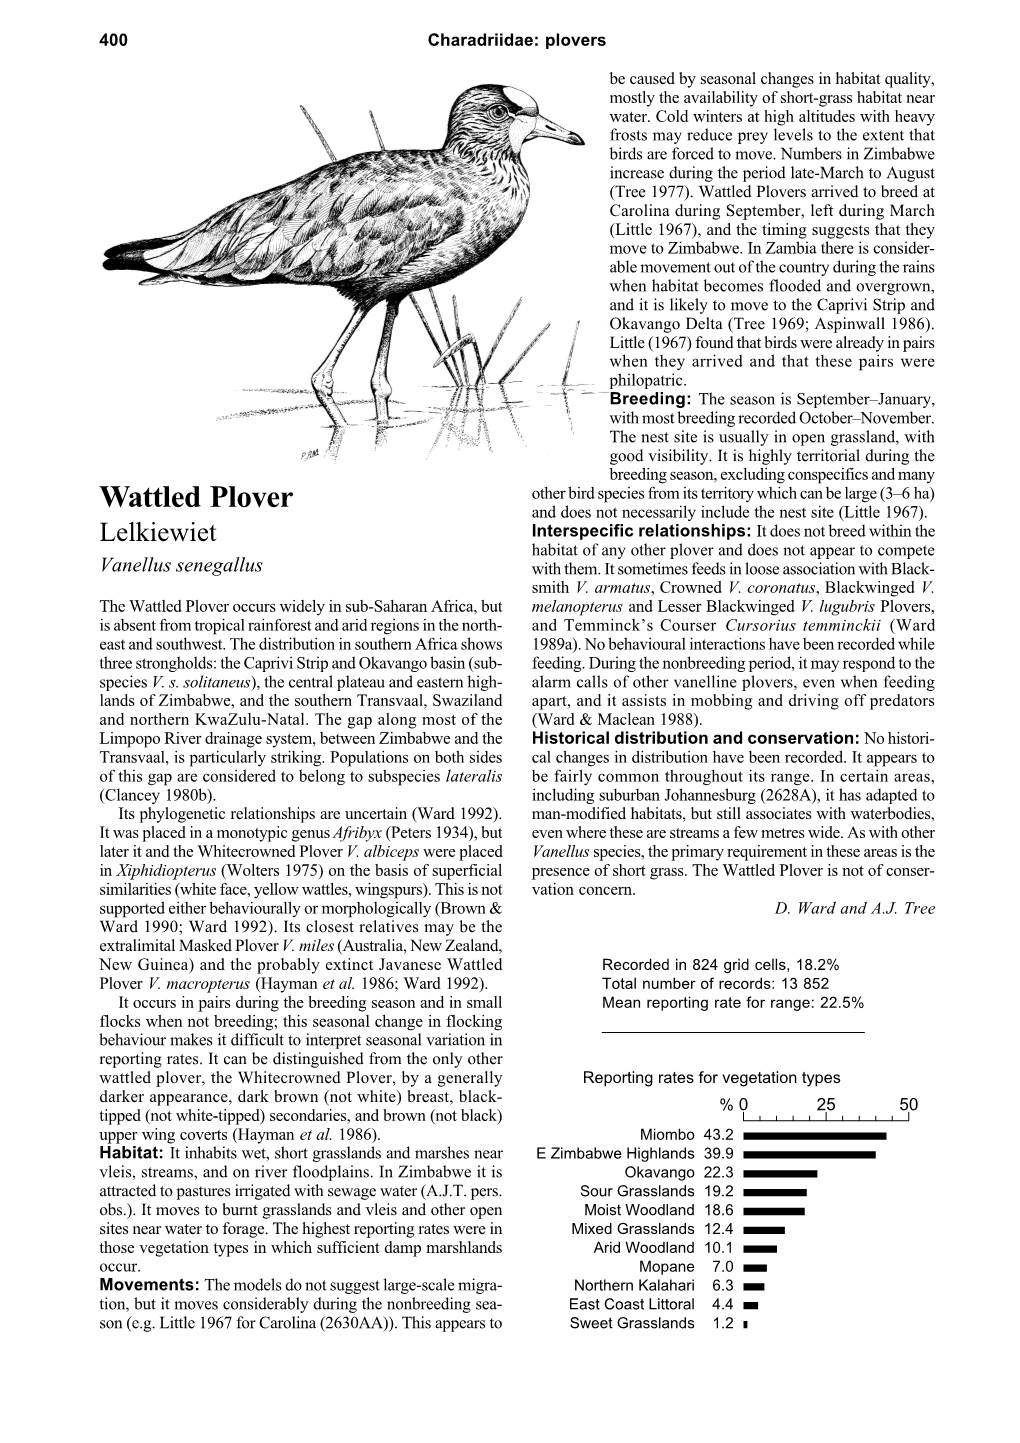 Wattled Plovers Arrived to Breed at Carolina During September, Left During March (Little 1967), and the Timing Suggests That They Move to Zimbabwe